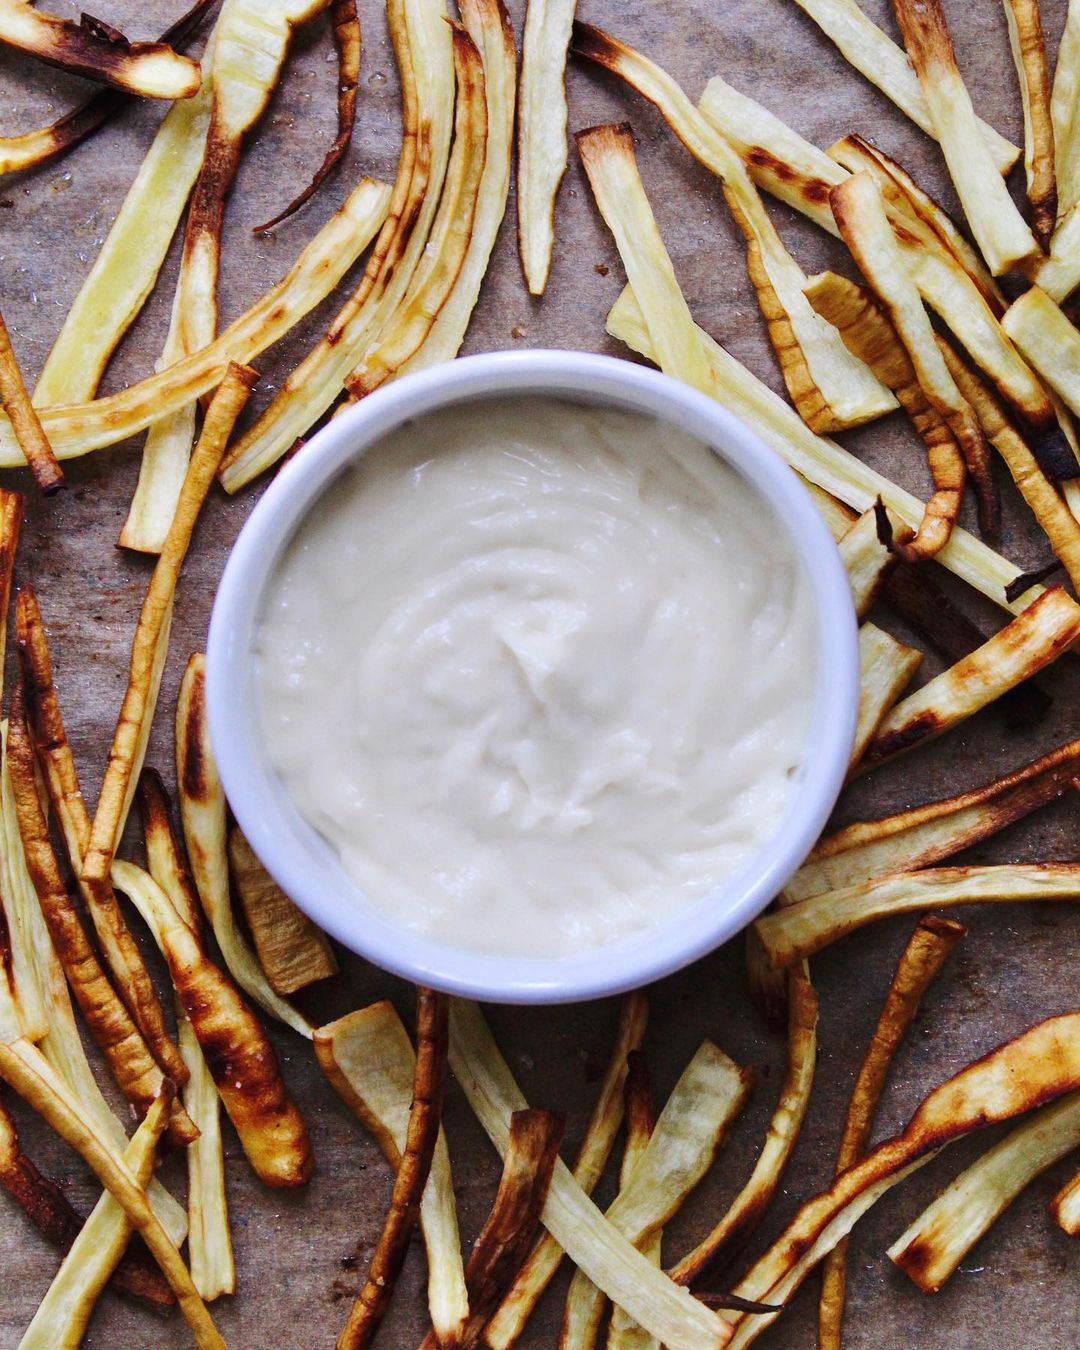 Shoestring Parsnip Fries with Roasted Garlic Aioli